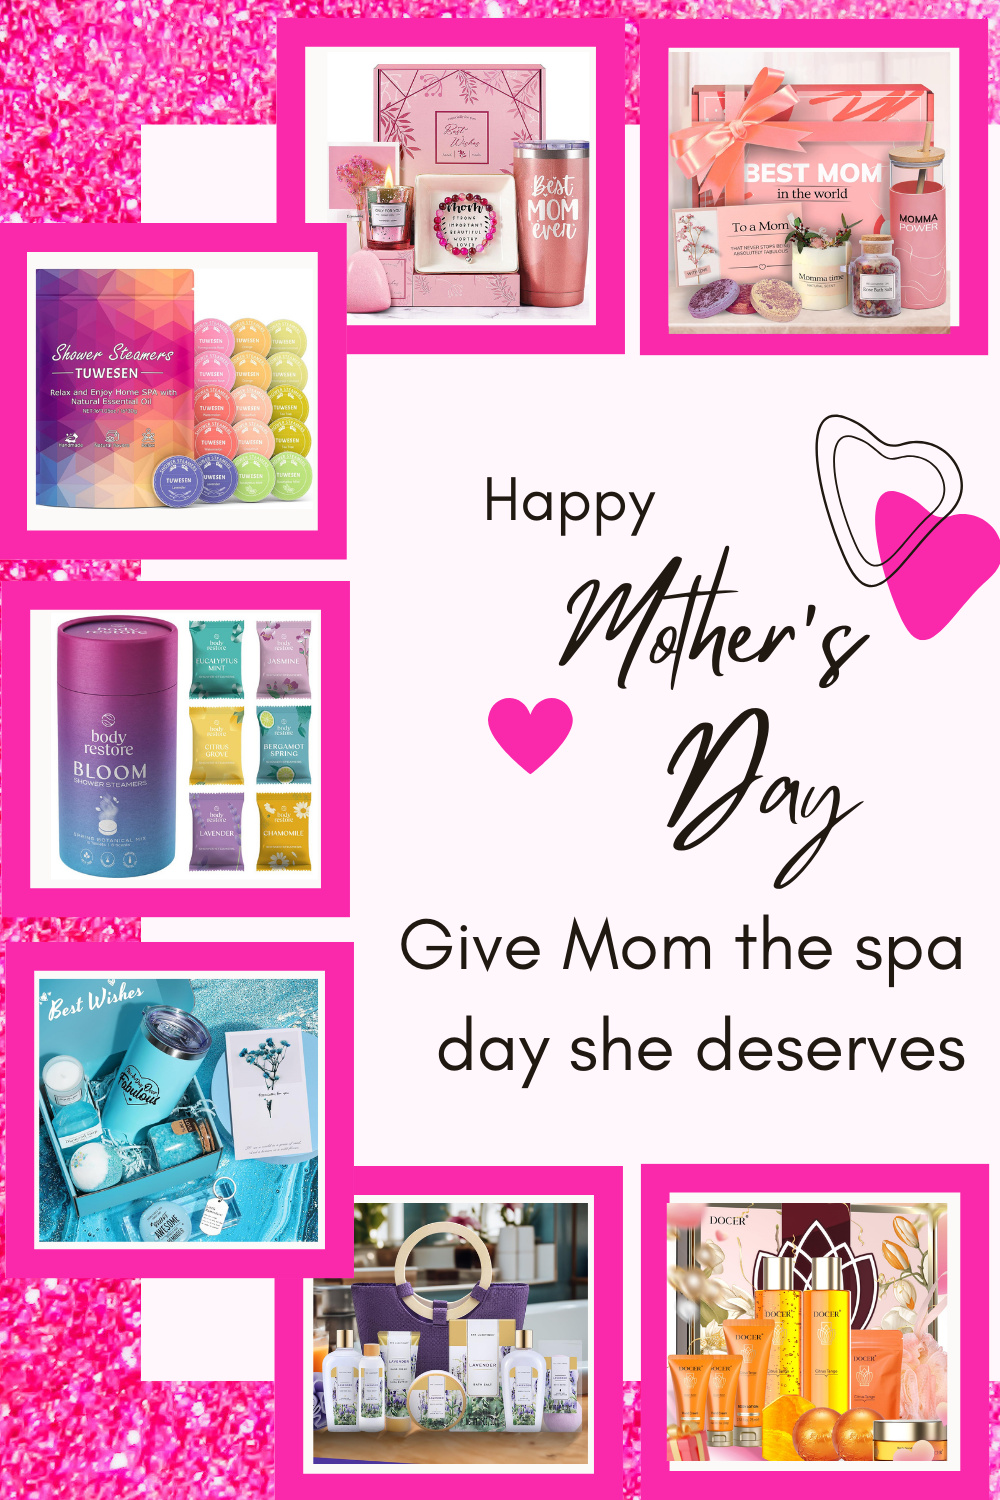 Give Mom The Spa Day She Deserves